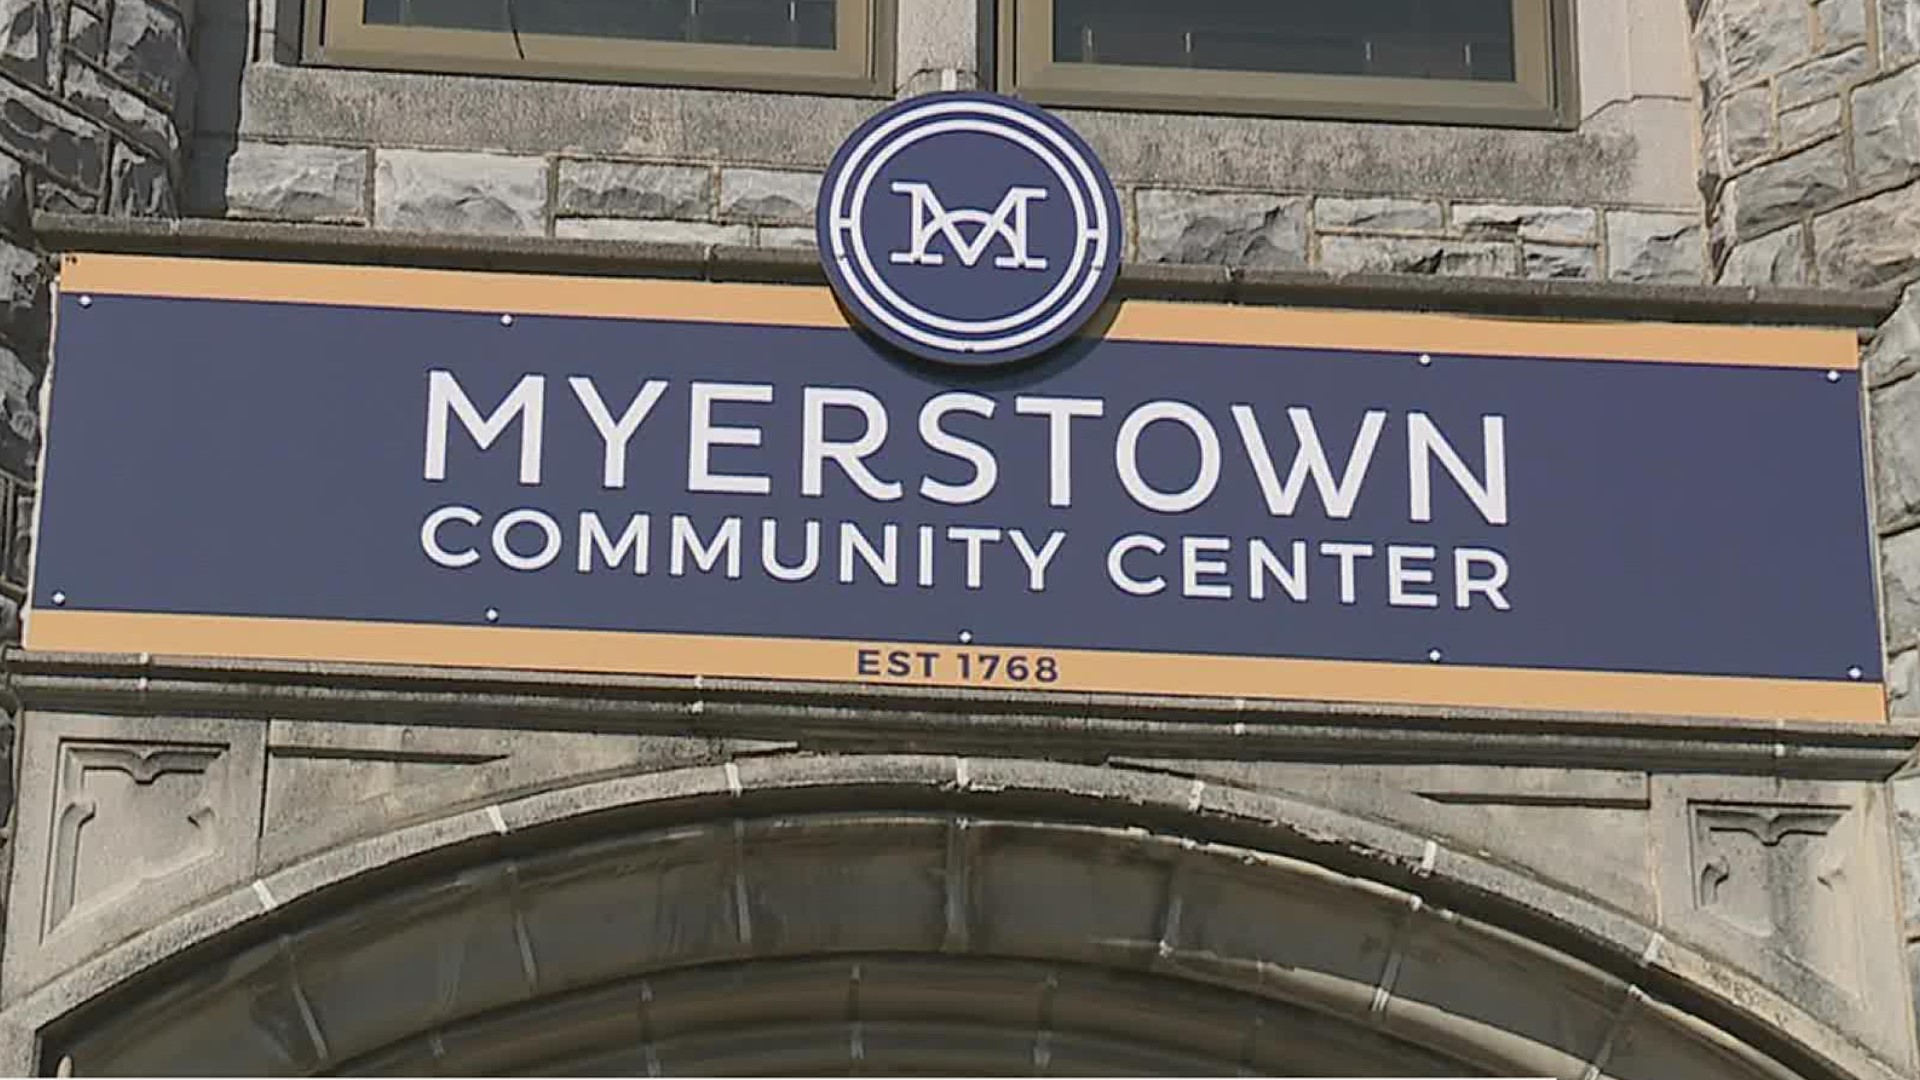 The Myerstown branch of the center will work in conjunction with the Lebanon offices and will add their own programming and networking specific to Myerstown.